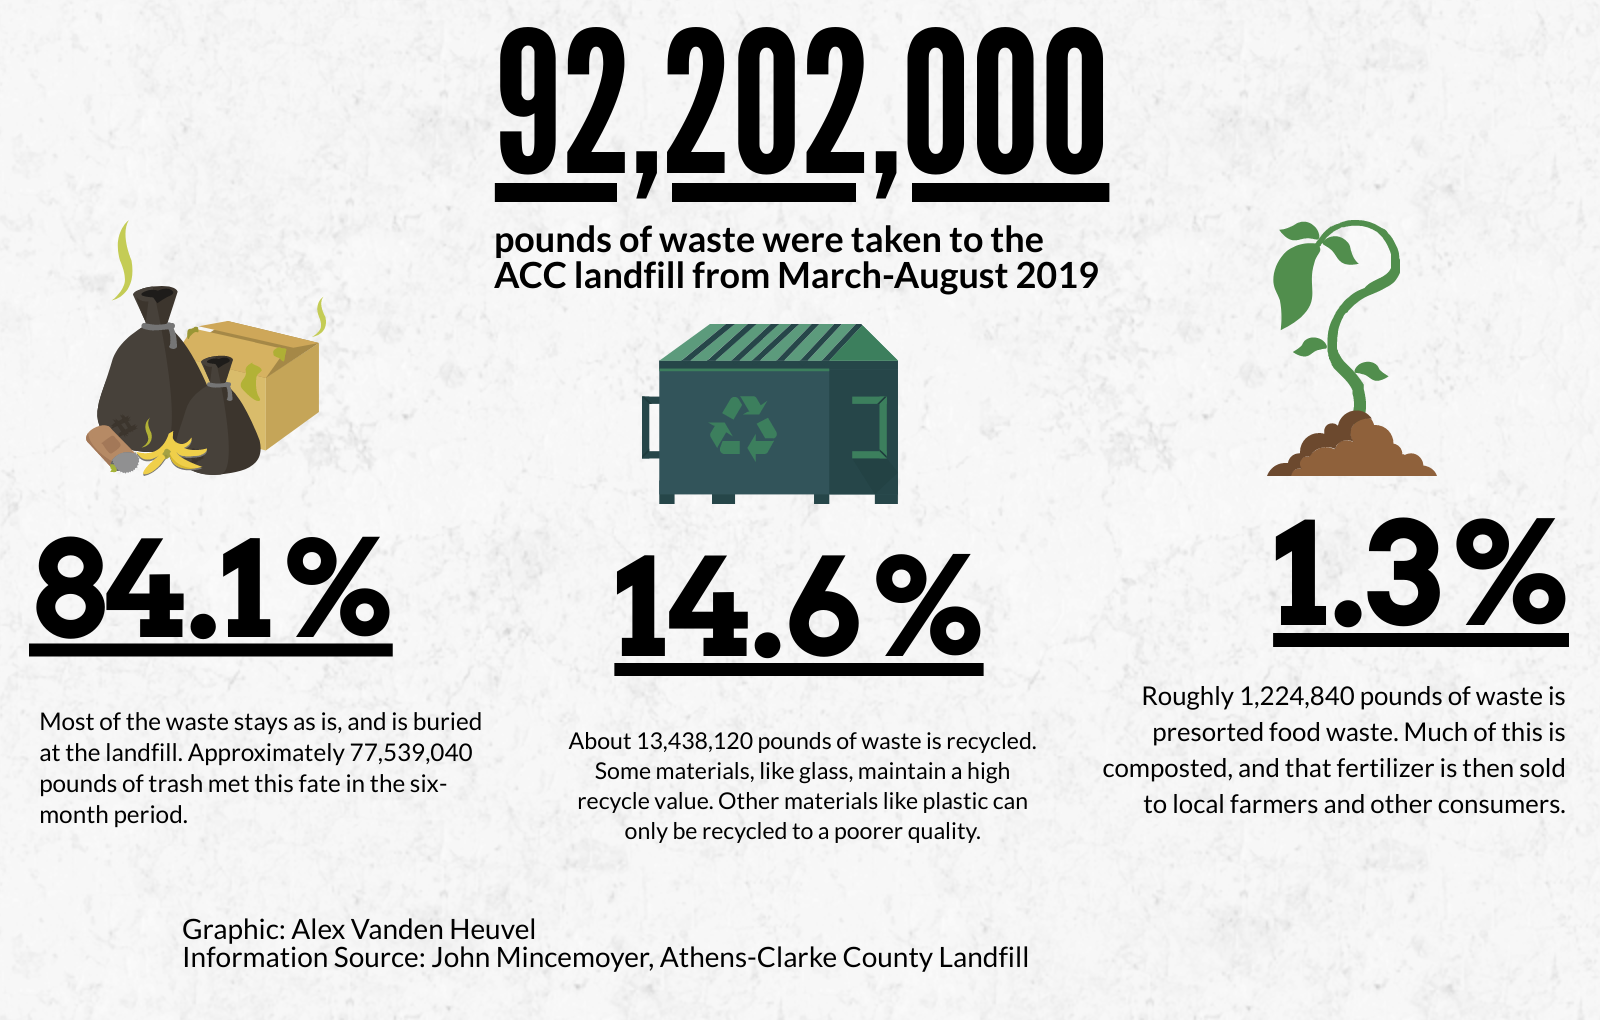 92.2 million pounds of waste was taken to the ACC landfill between March and August 2019. 14.6% was recycled, and only 1.3% was composted.